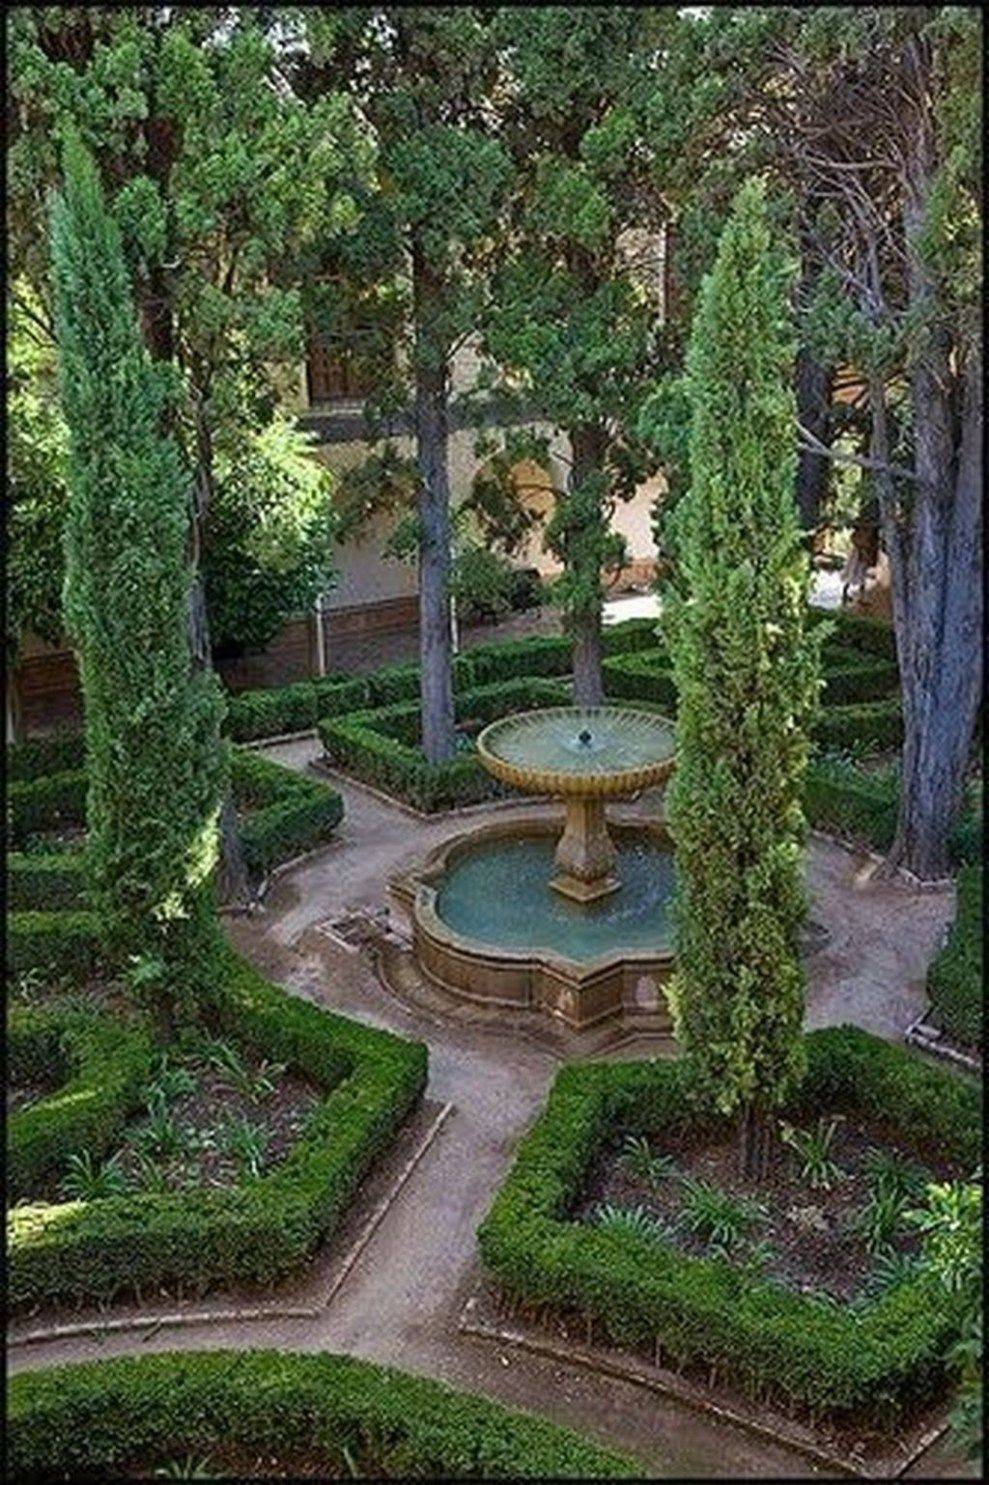 The Most Beautiful Gardens